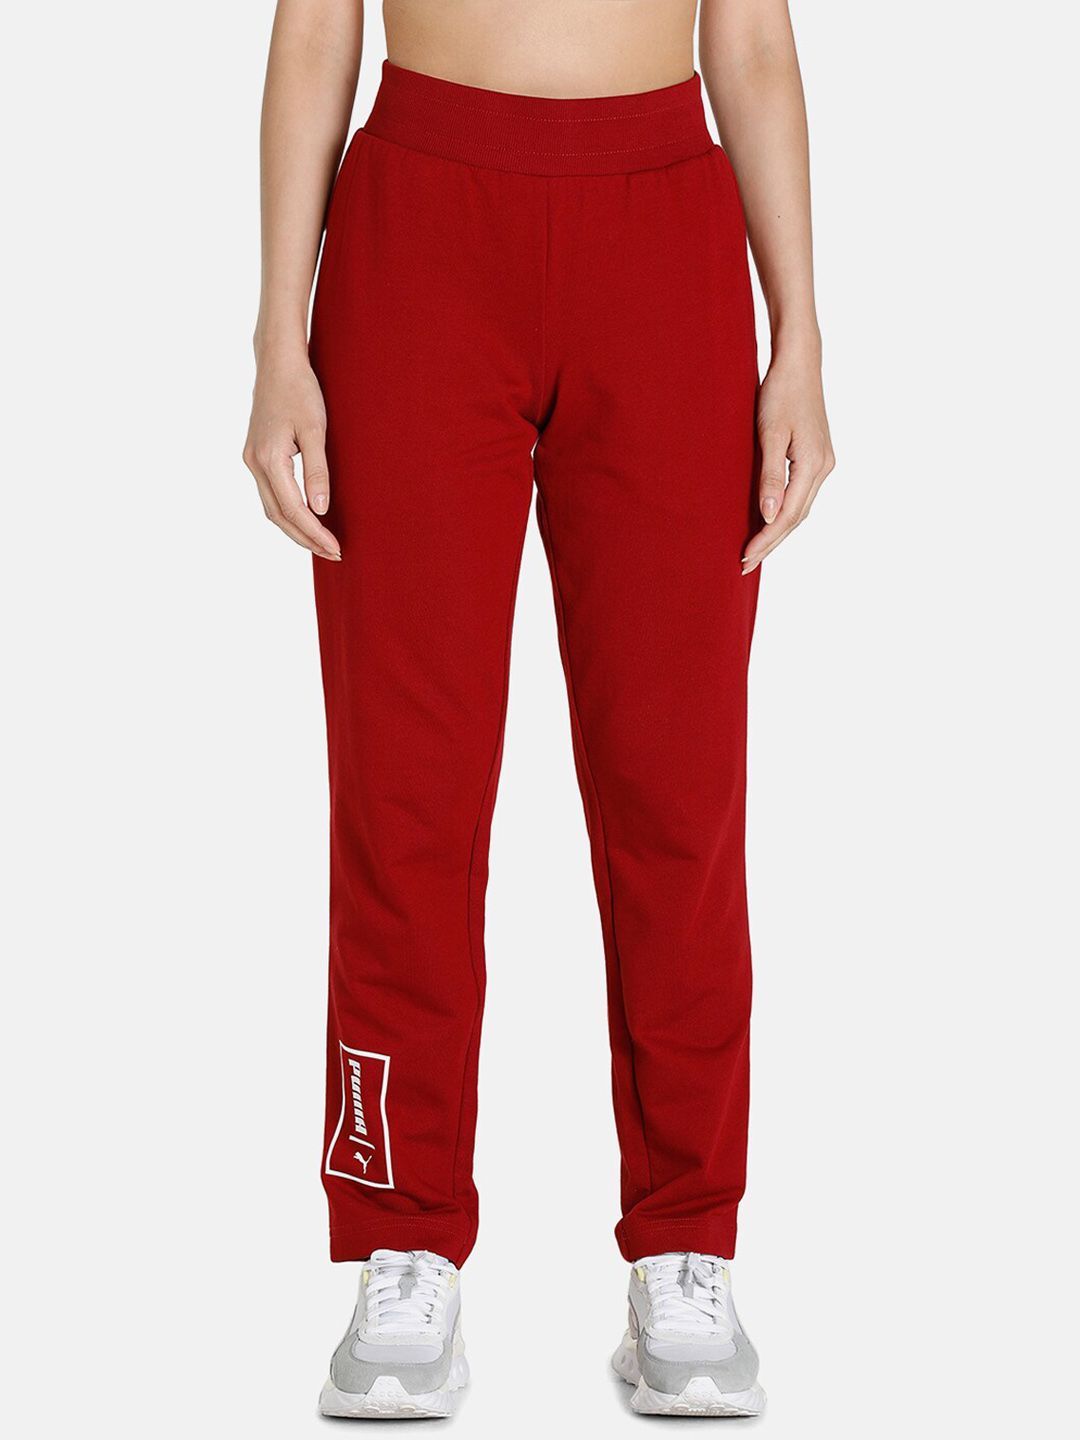 Puma Women Red Graphic Track Pants Price in India